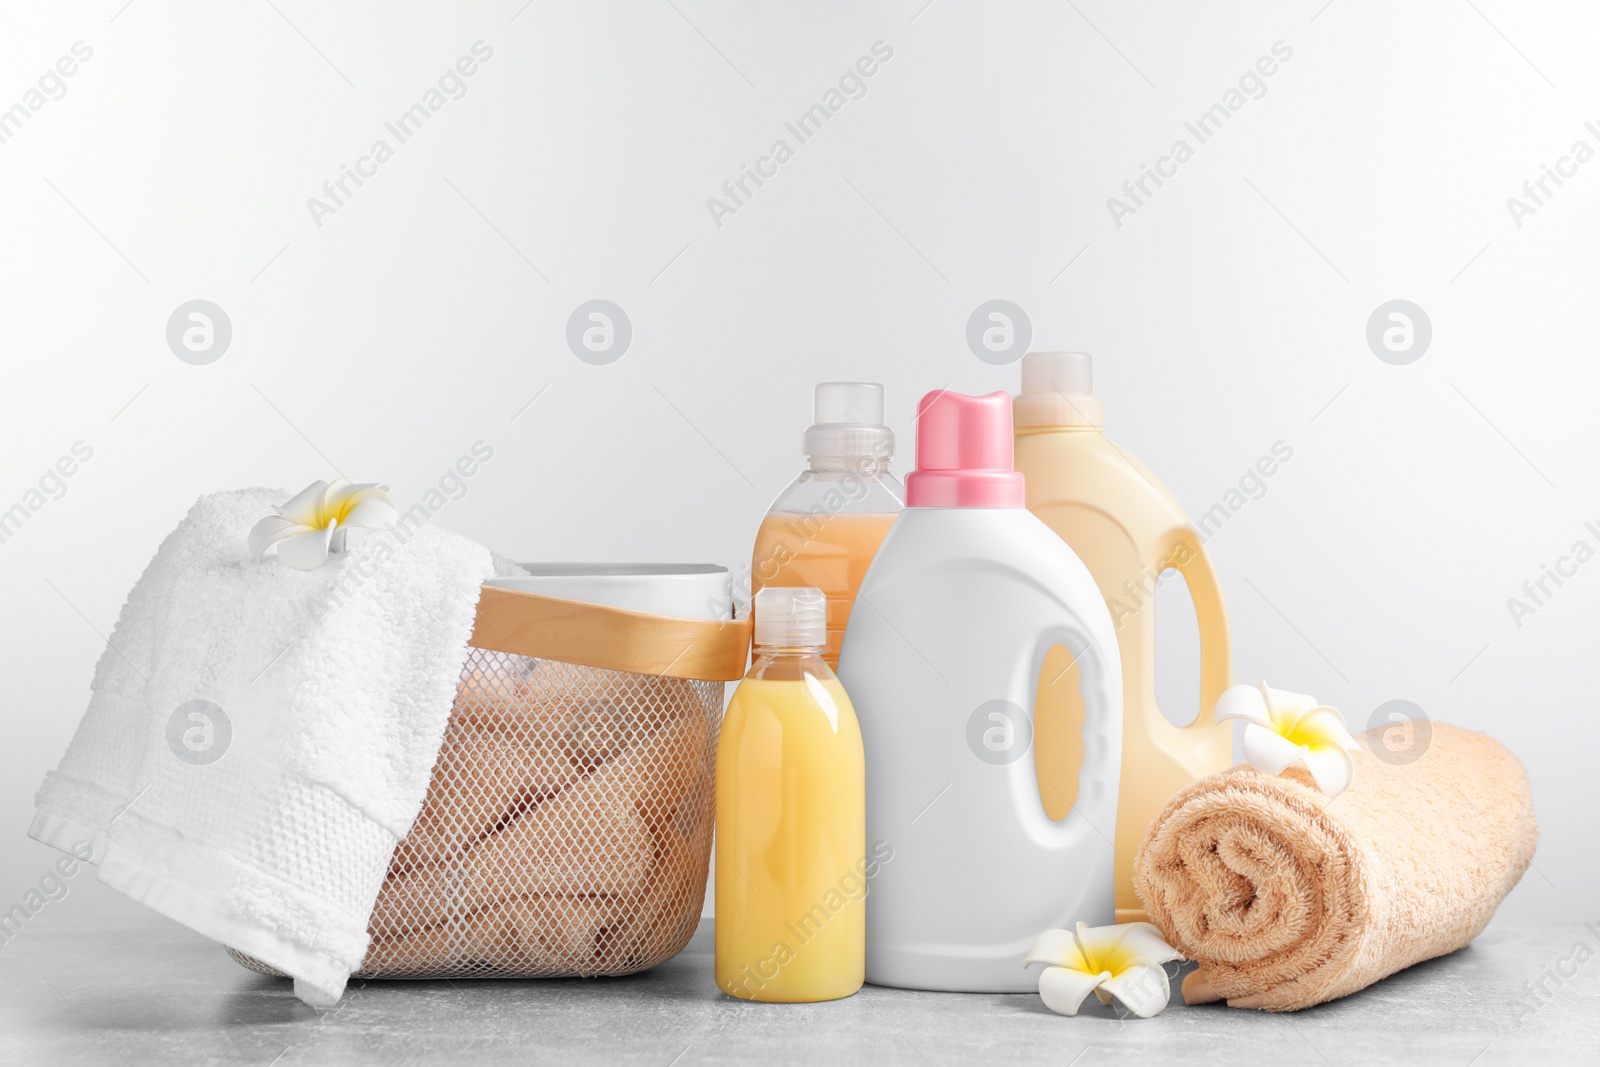 Photo of Bottles of laundry detergents and fresh towels on grey table against white background